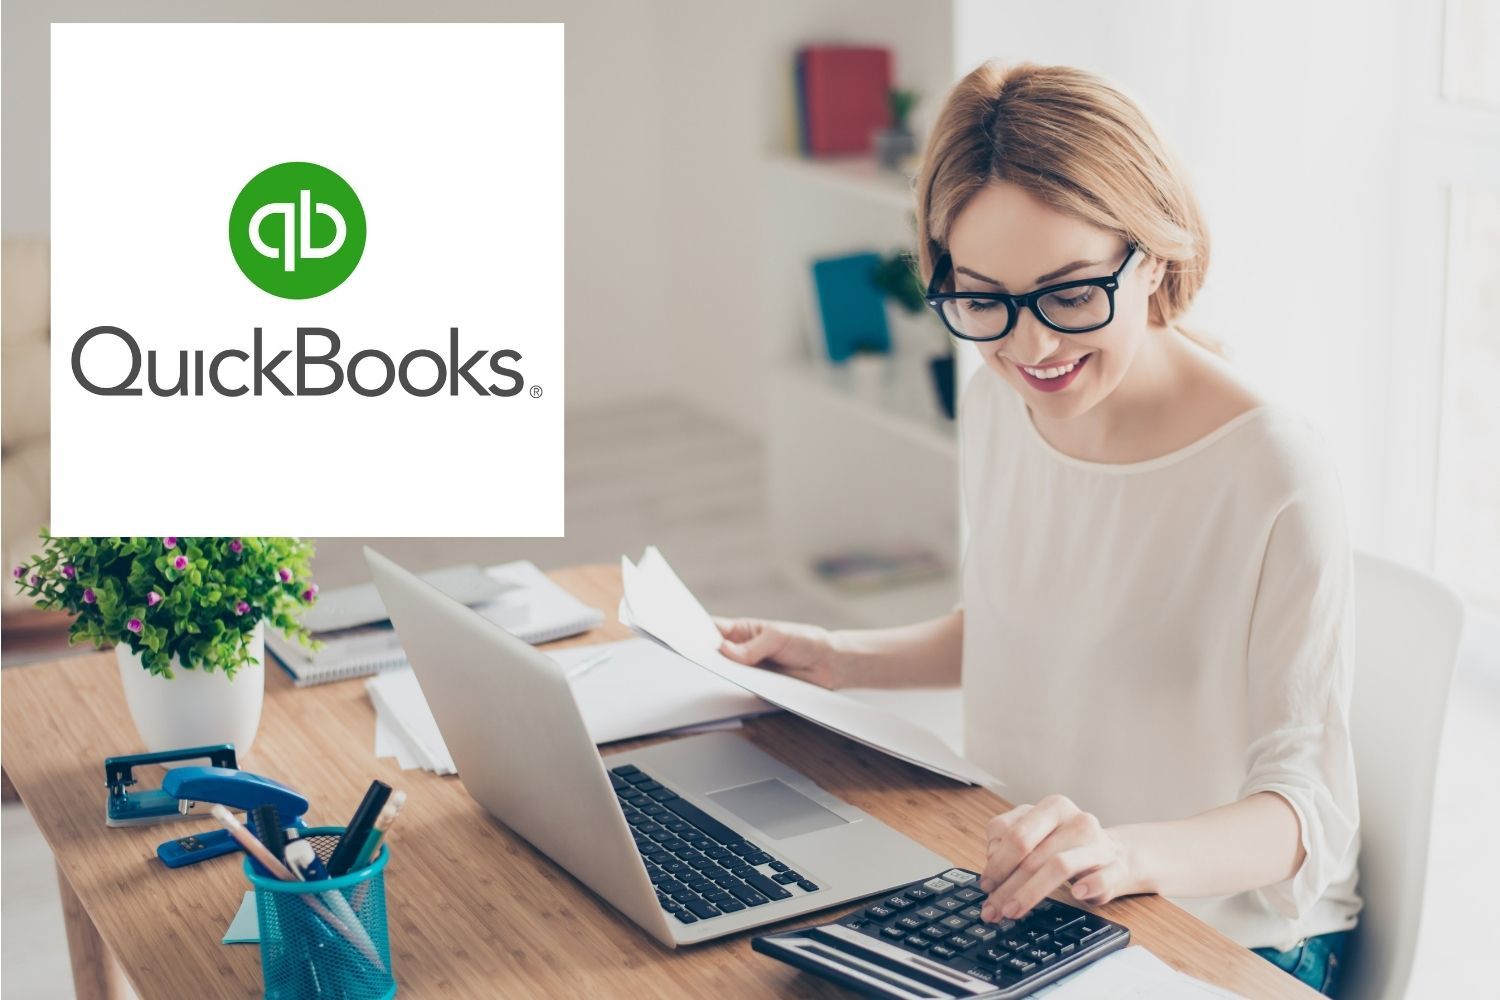 Get more familiar with QuickBooks Online version and become productive in it as well.